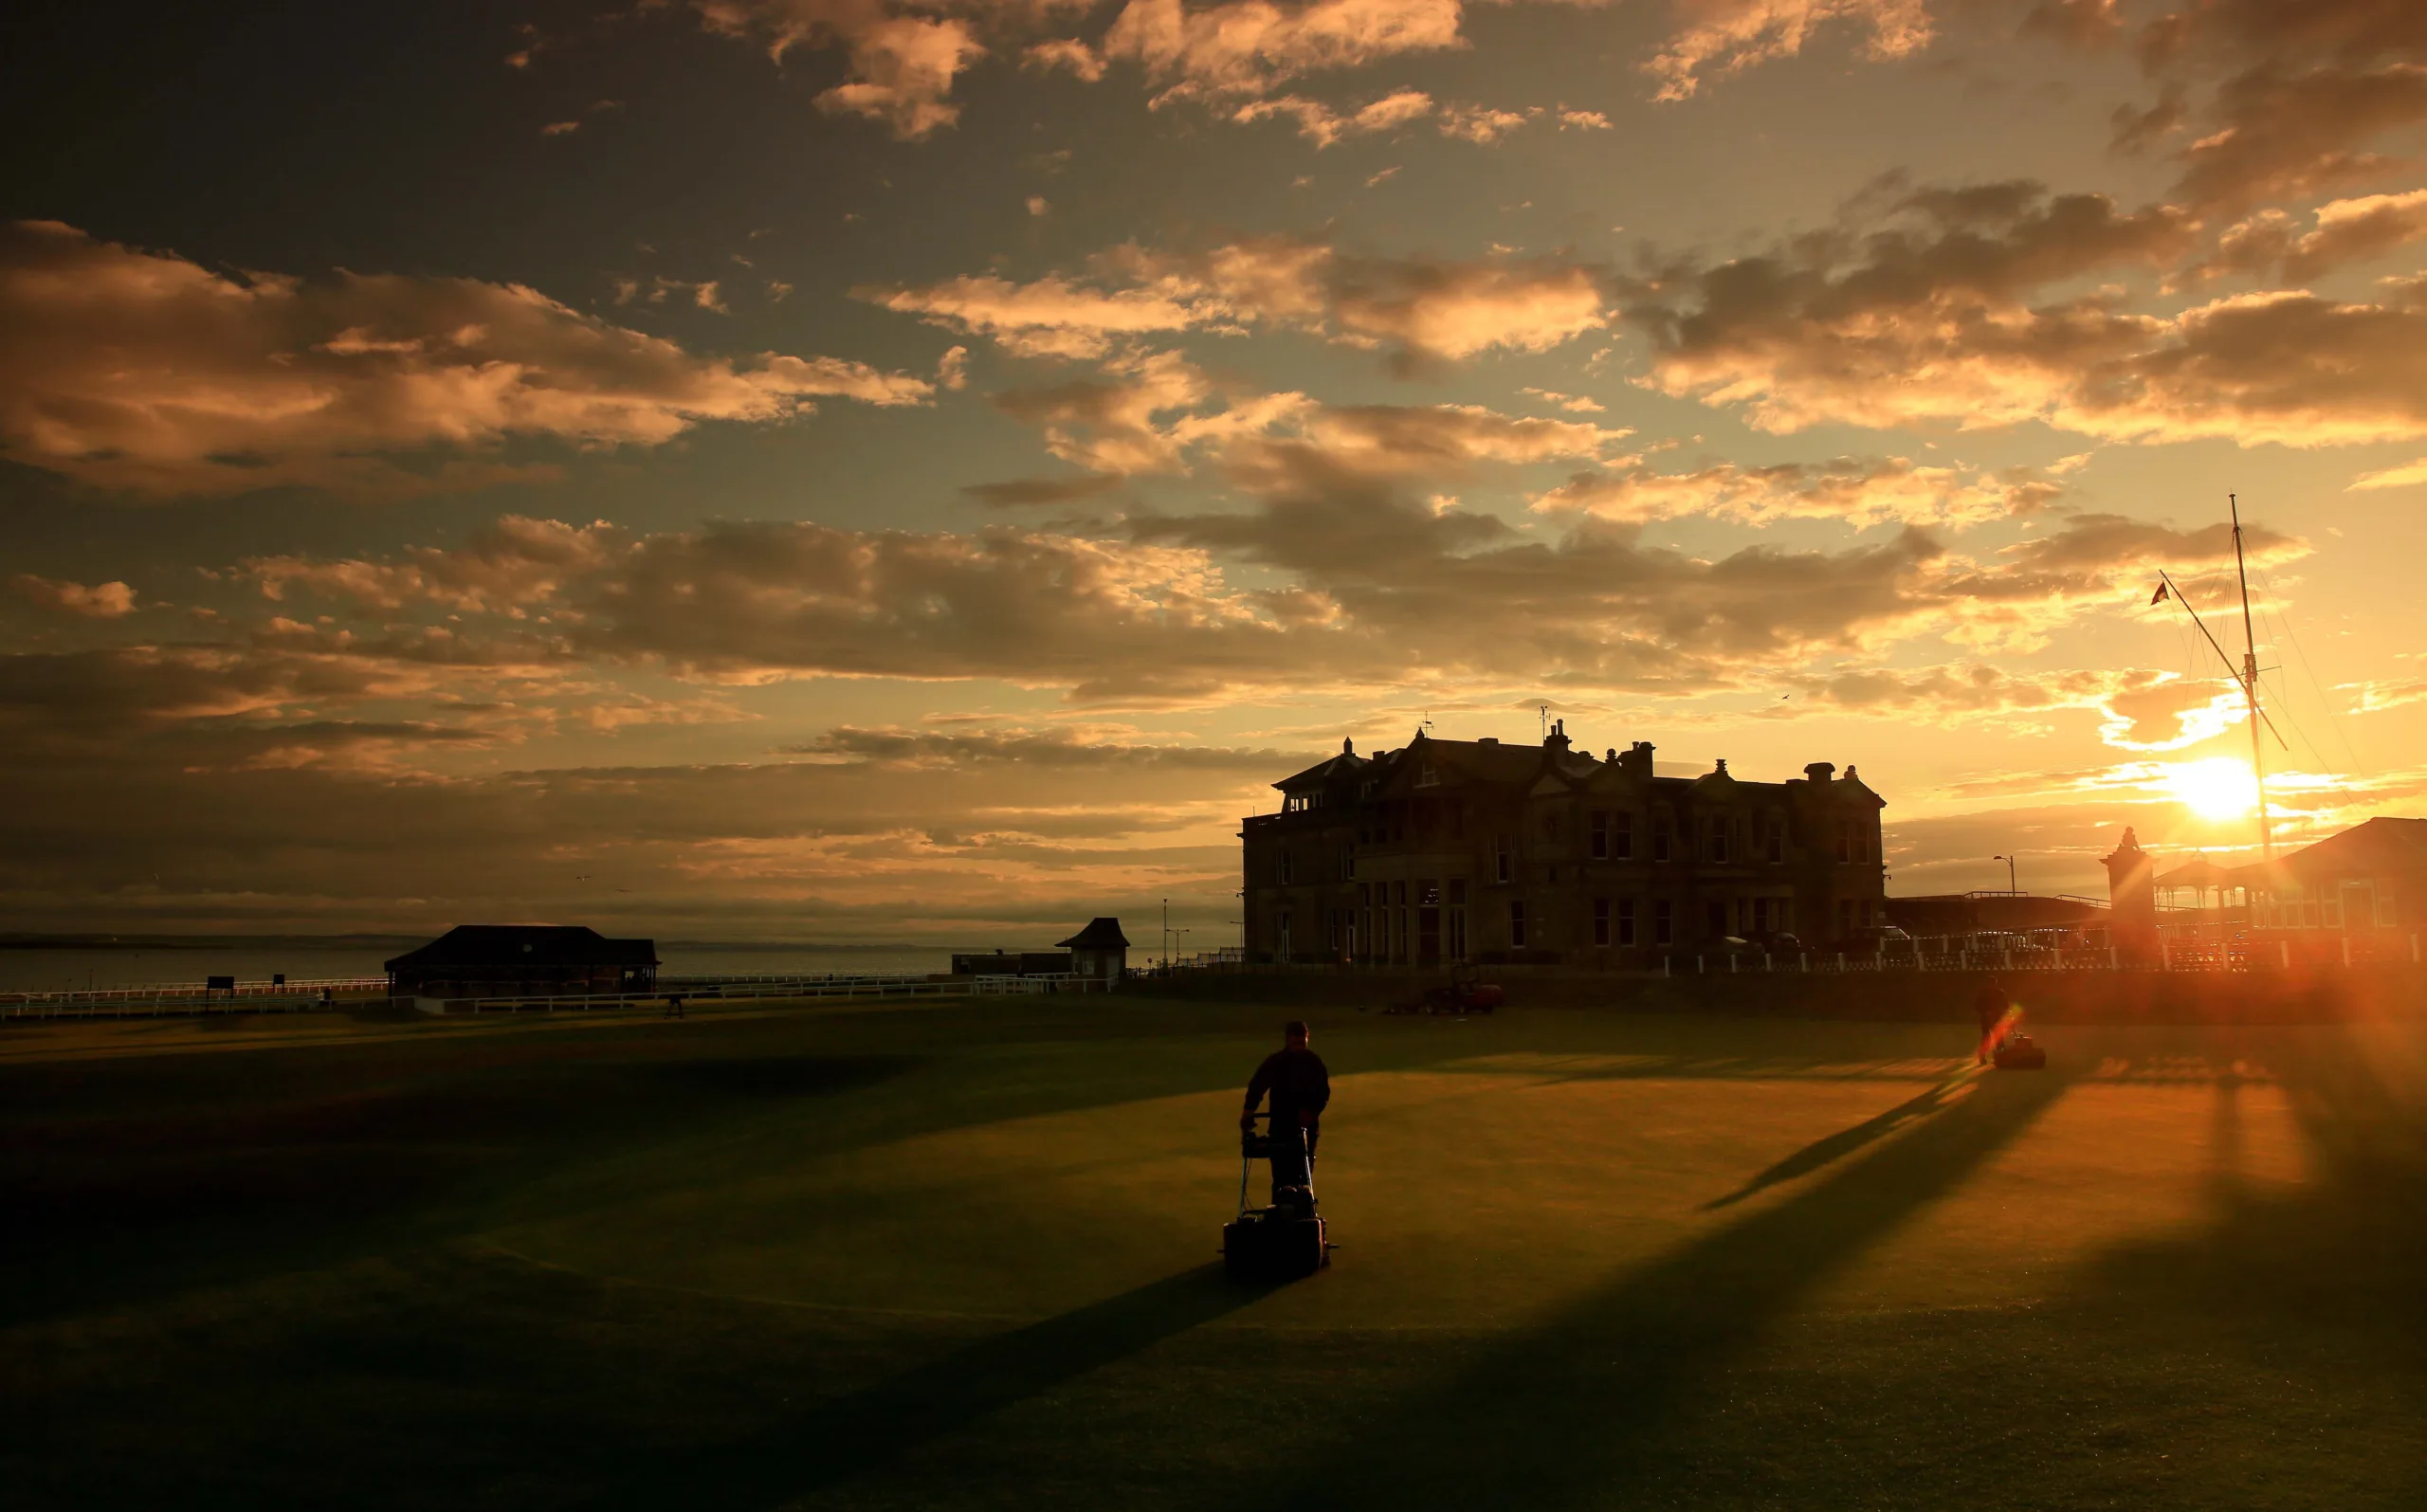 Old course St Andrews